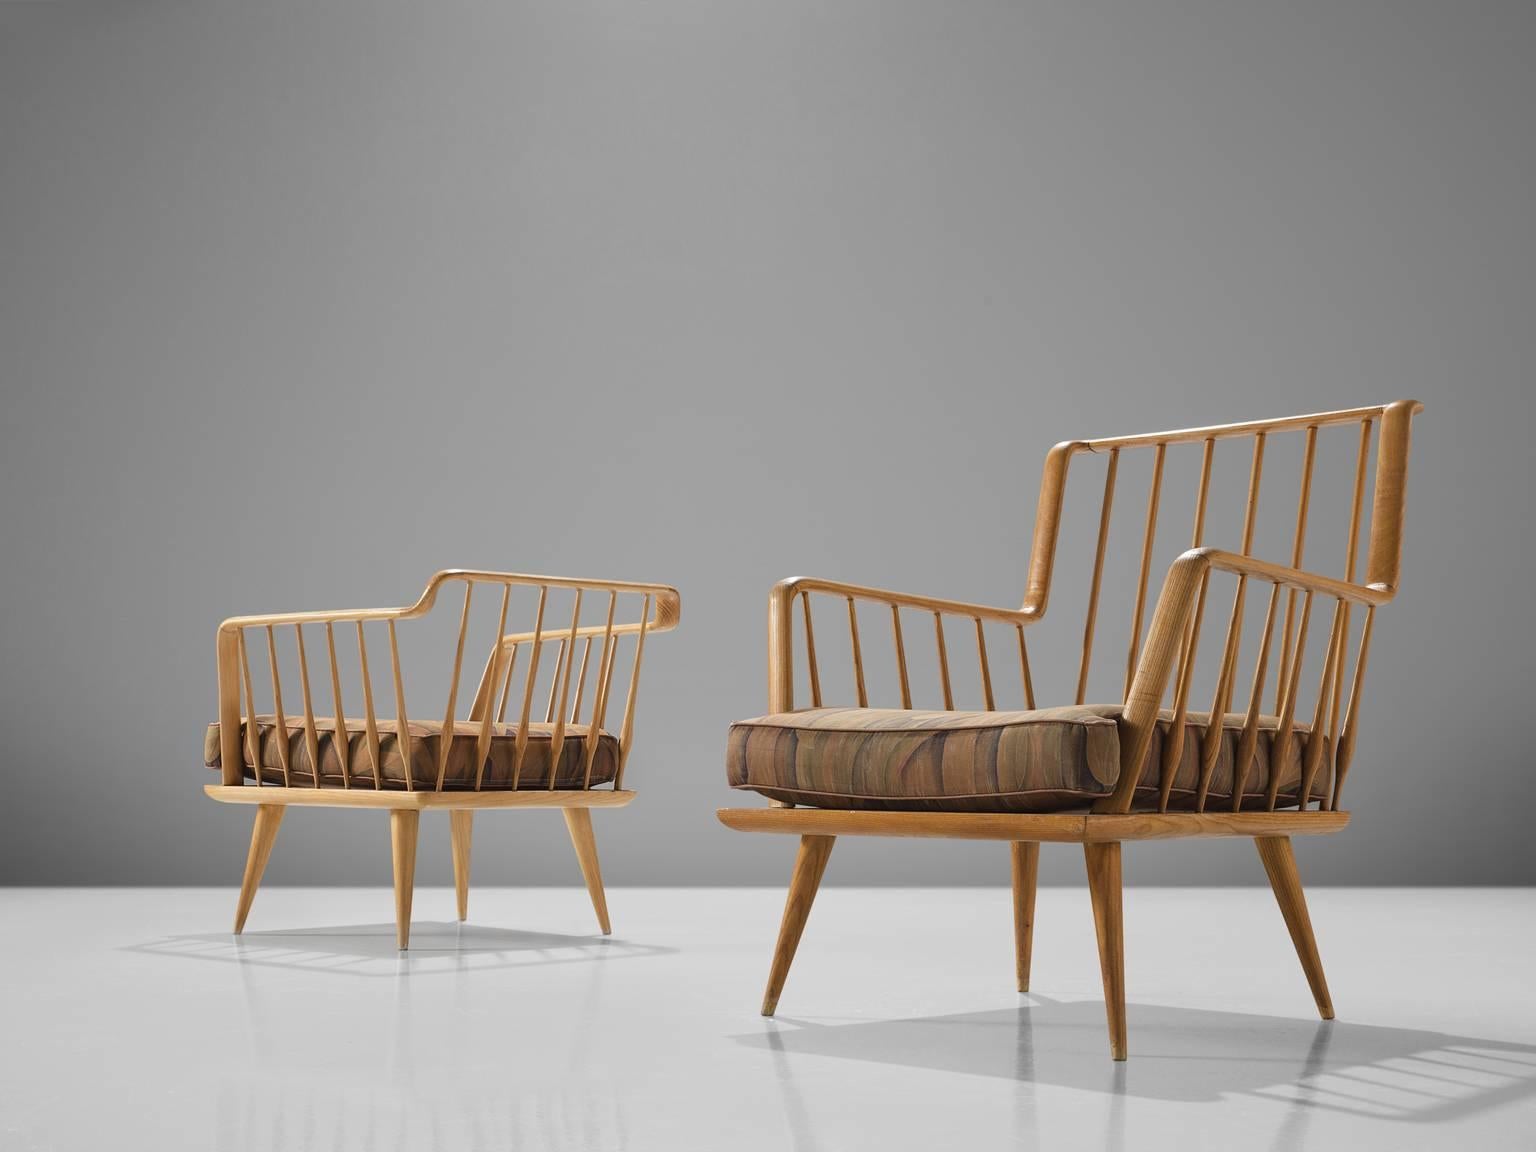 Lounge chairs in oak and fabric, France, 1960s

This set has a very sculptural, open frame. The tapered legs hold the slatted baskets and have a flowing shape. The chairs are airy and work well with our without a pillow. The chairs are provided with